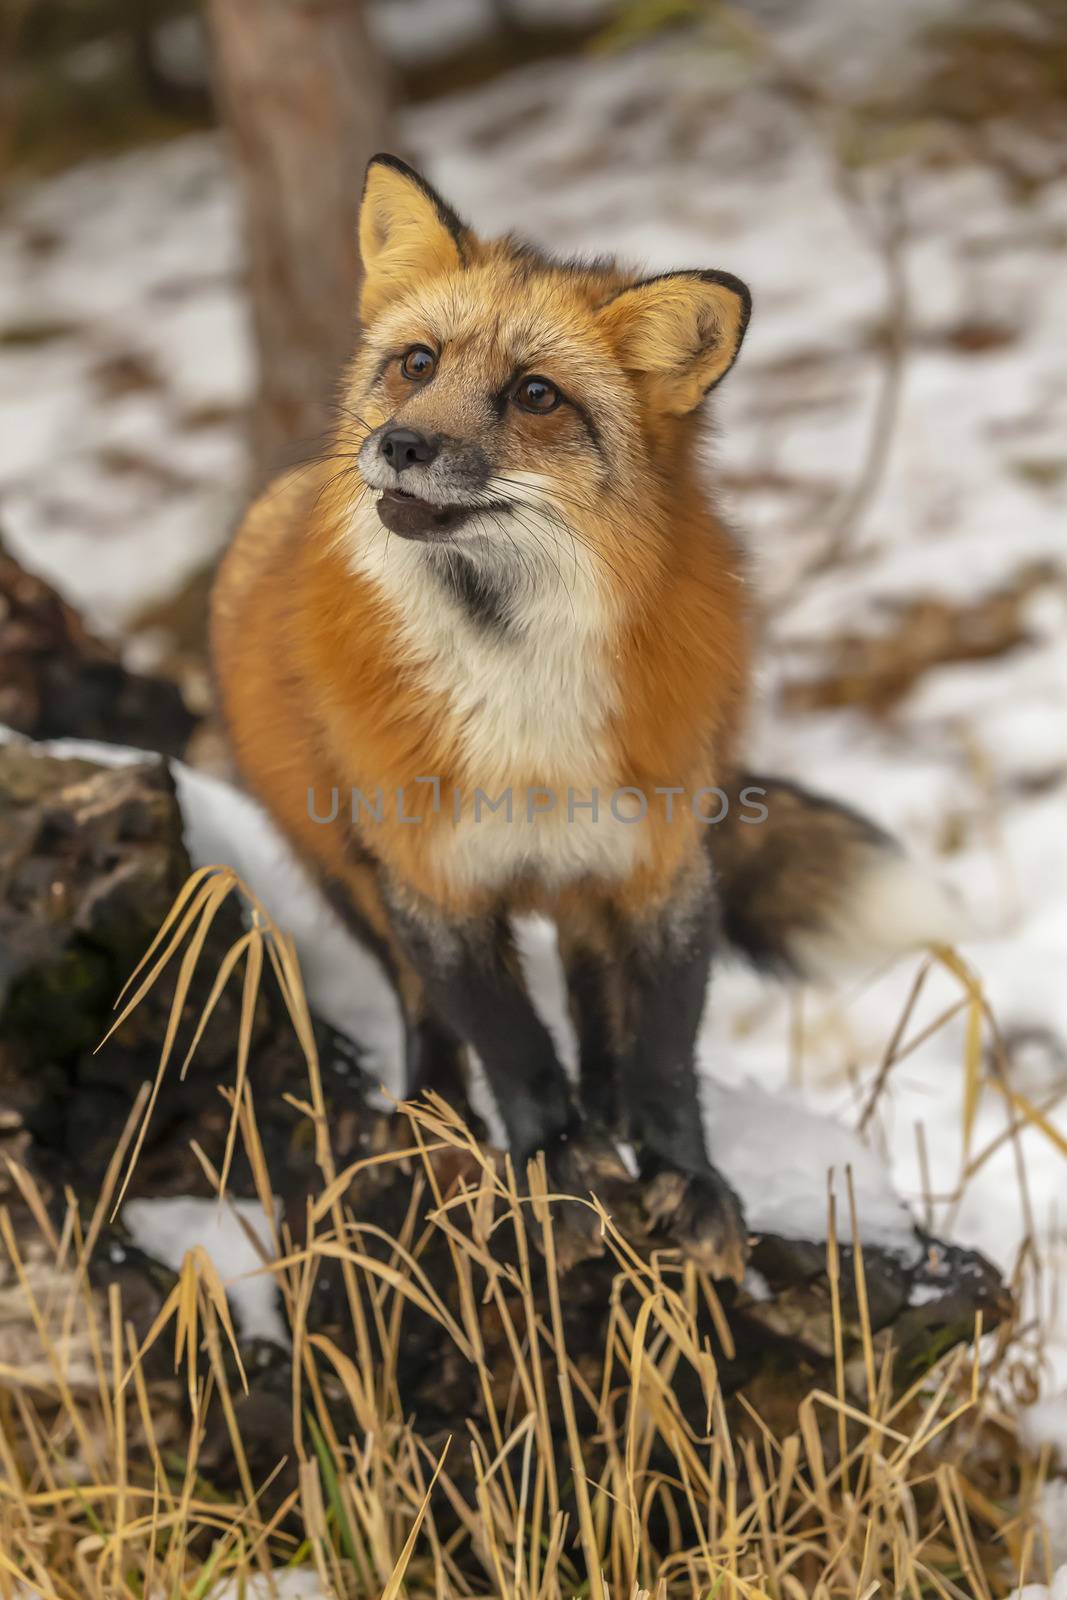 A Red Fox hunting for pray in a snowy environment